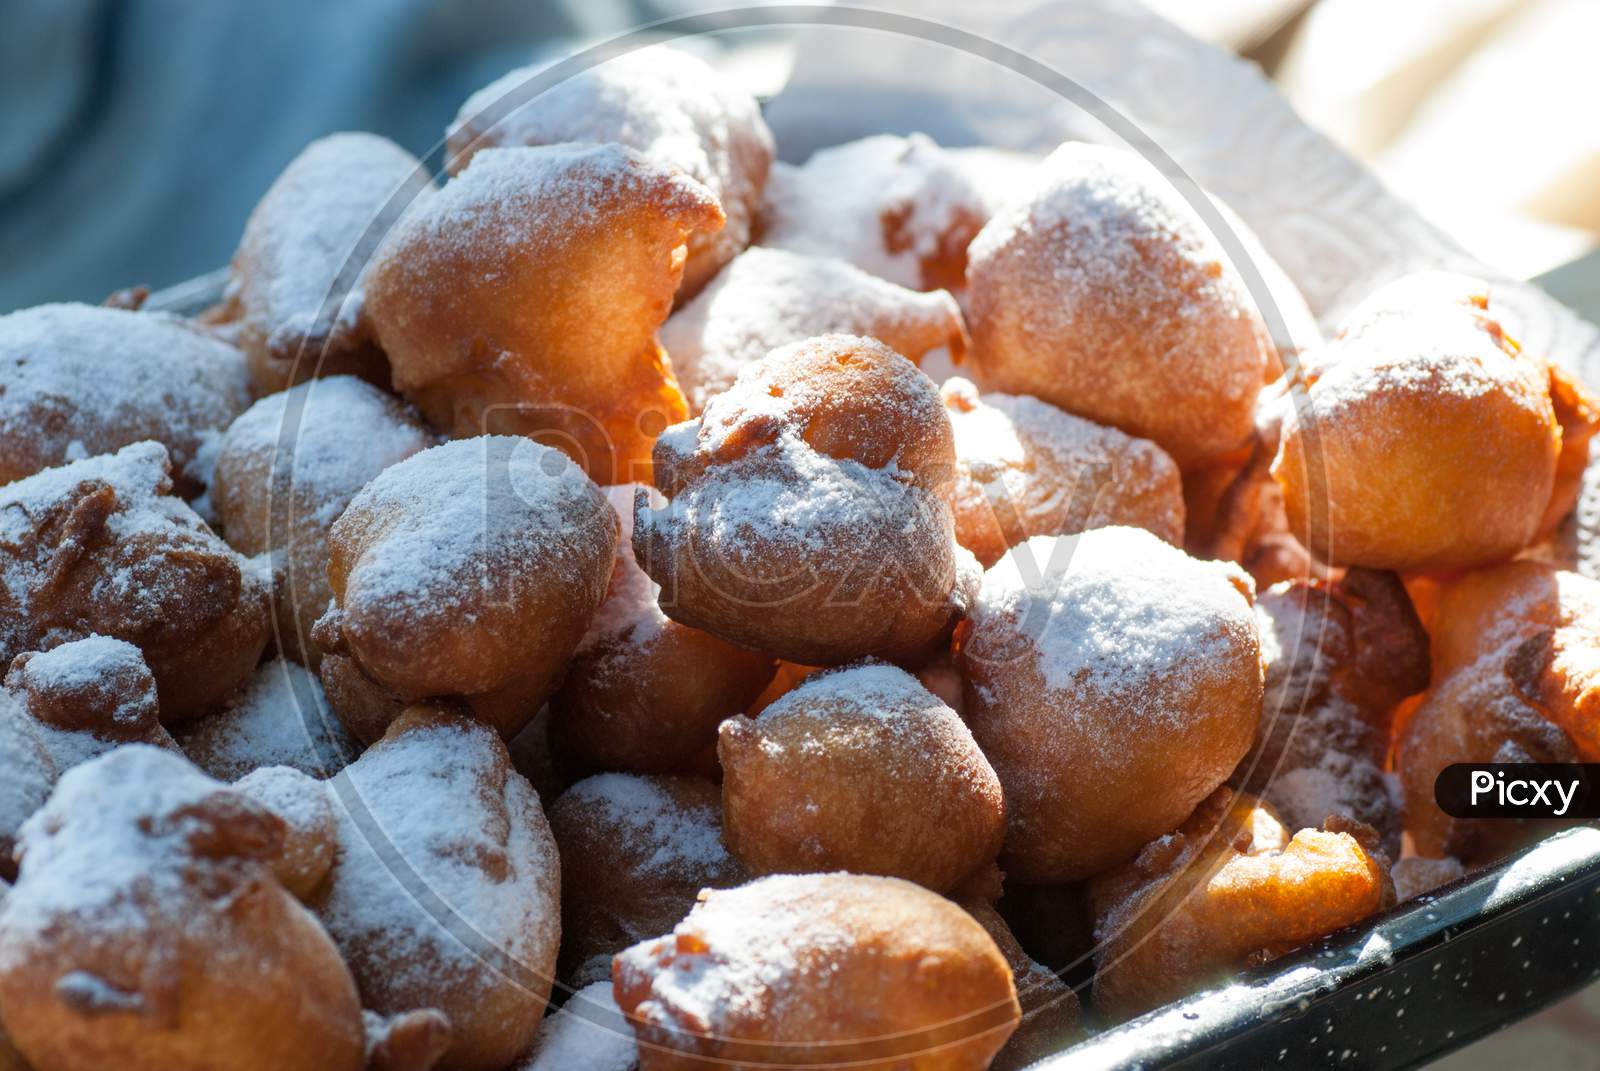 romanian traditional tasty delicious mini doughnuts with powdered sugar above ready for eat